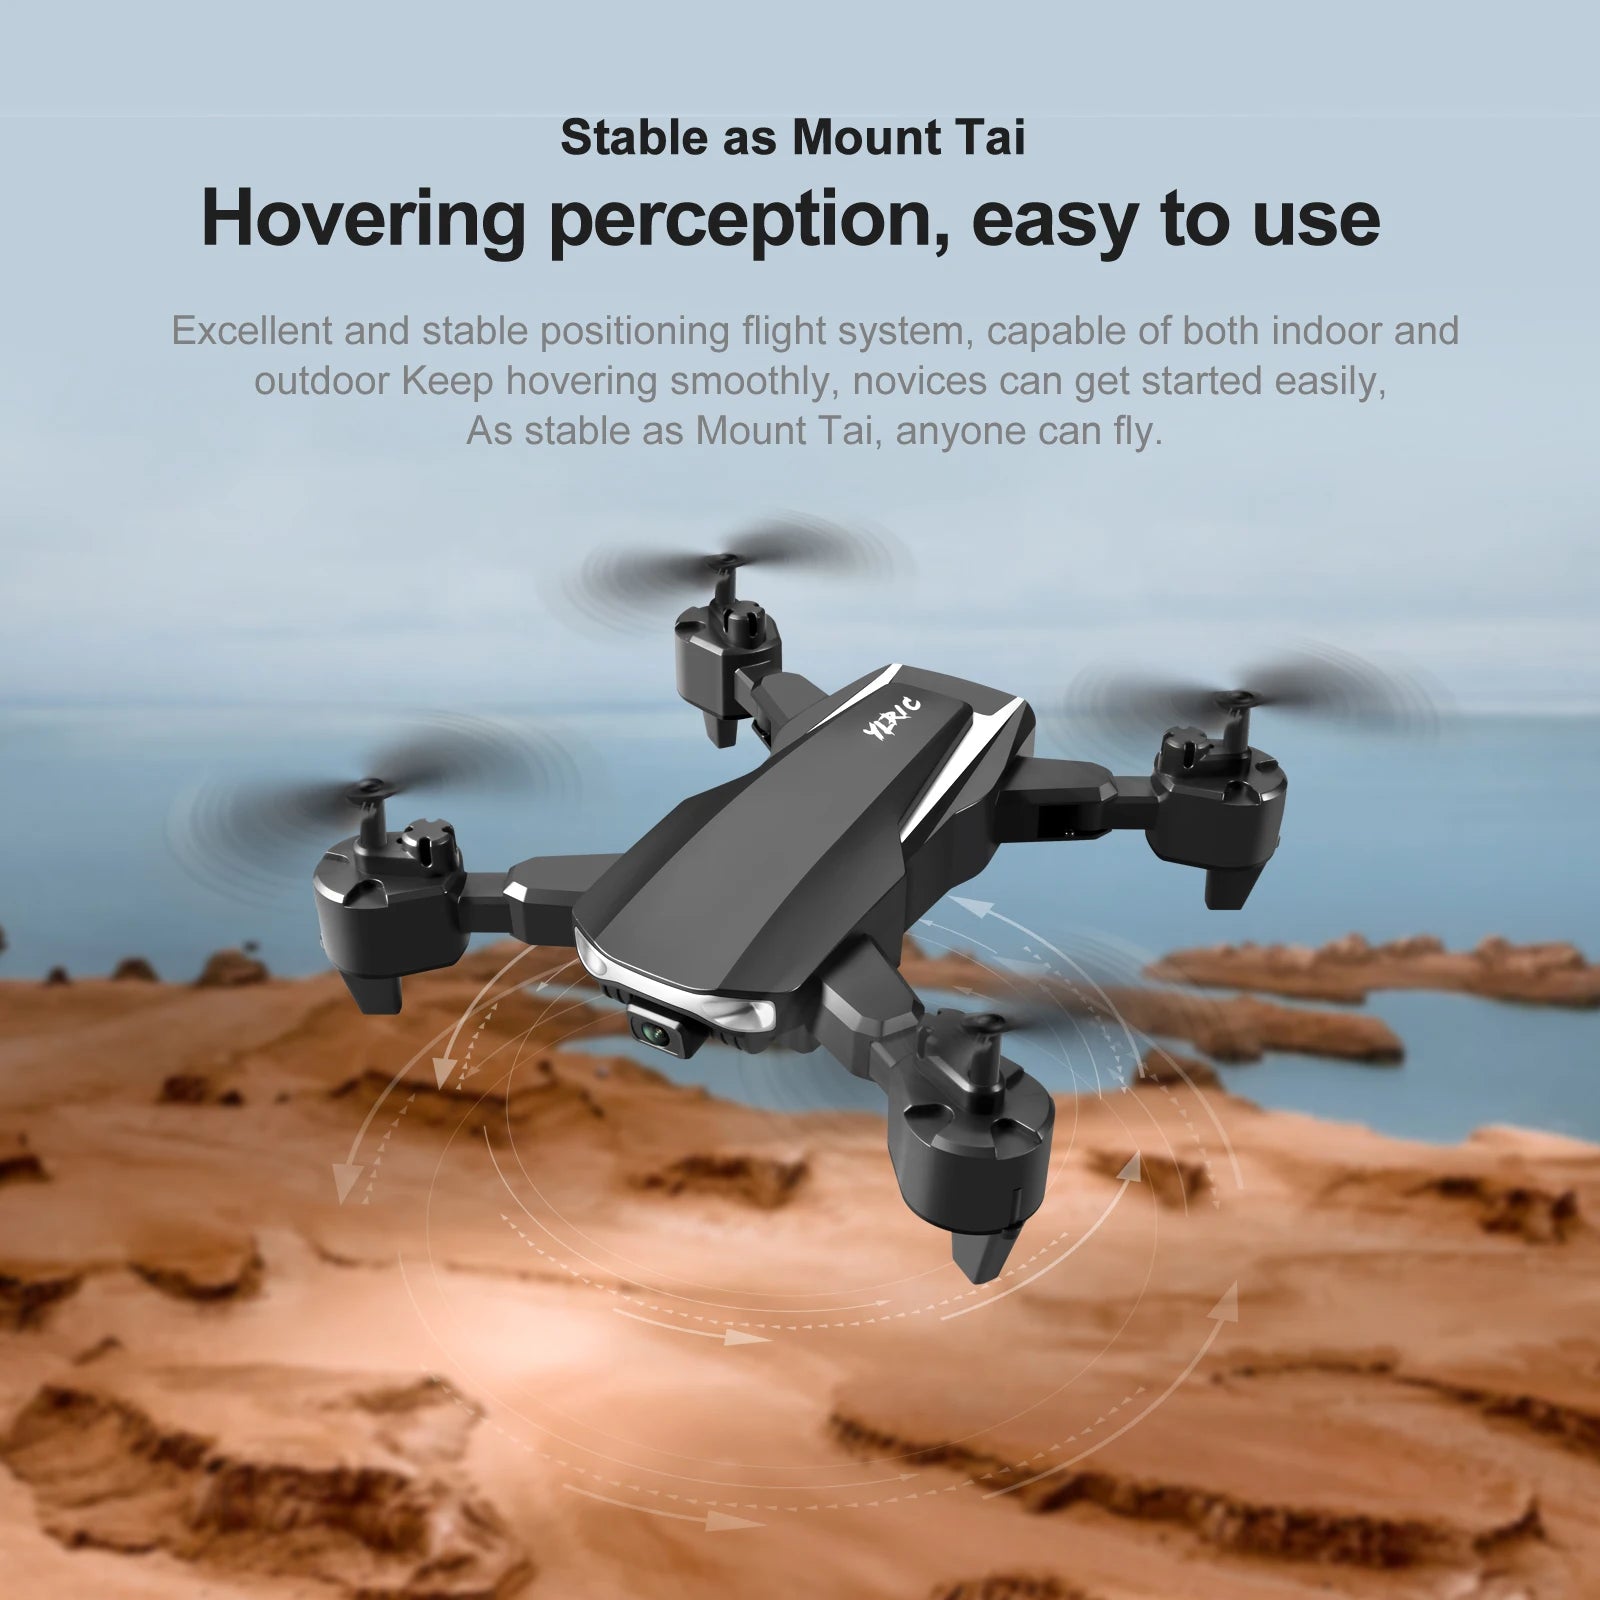 S90 Mini Drone, mount tai hovering perception, easy to use excellent and